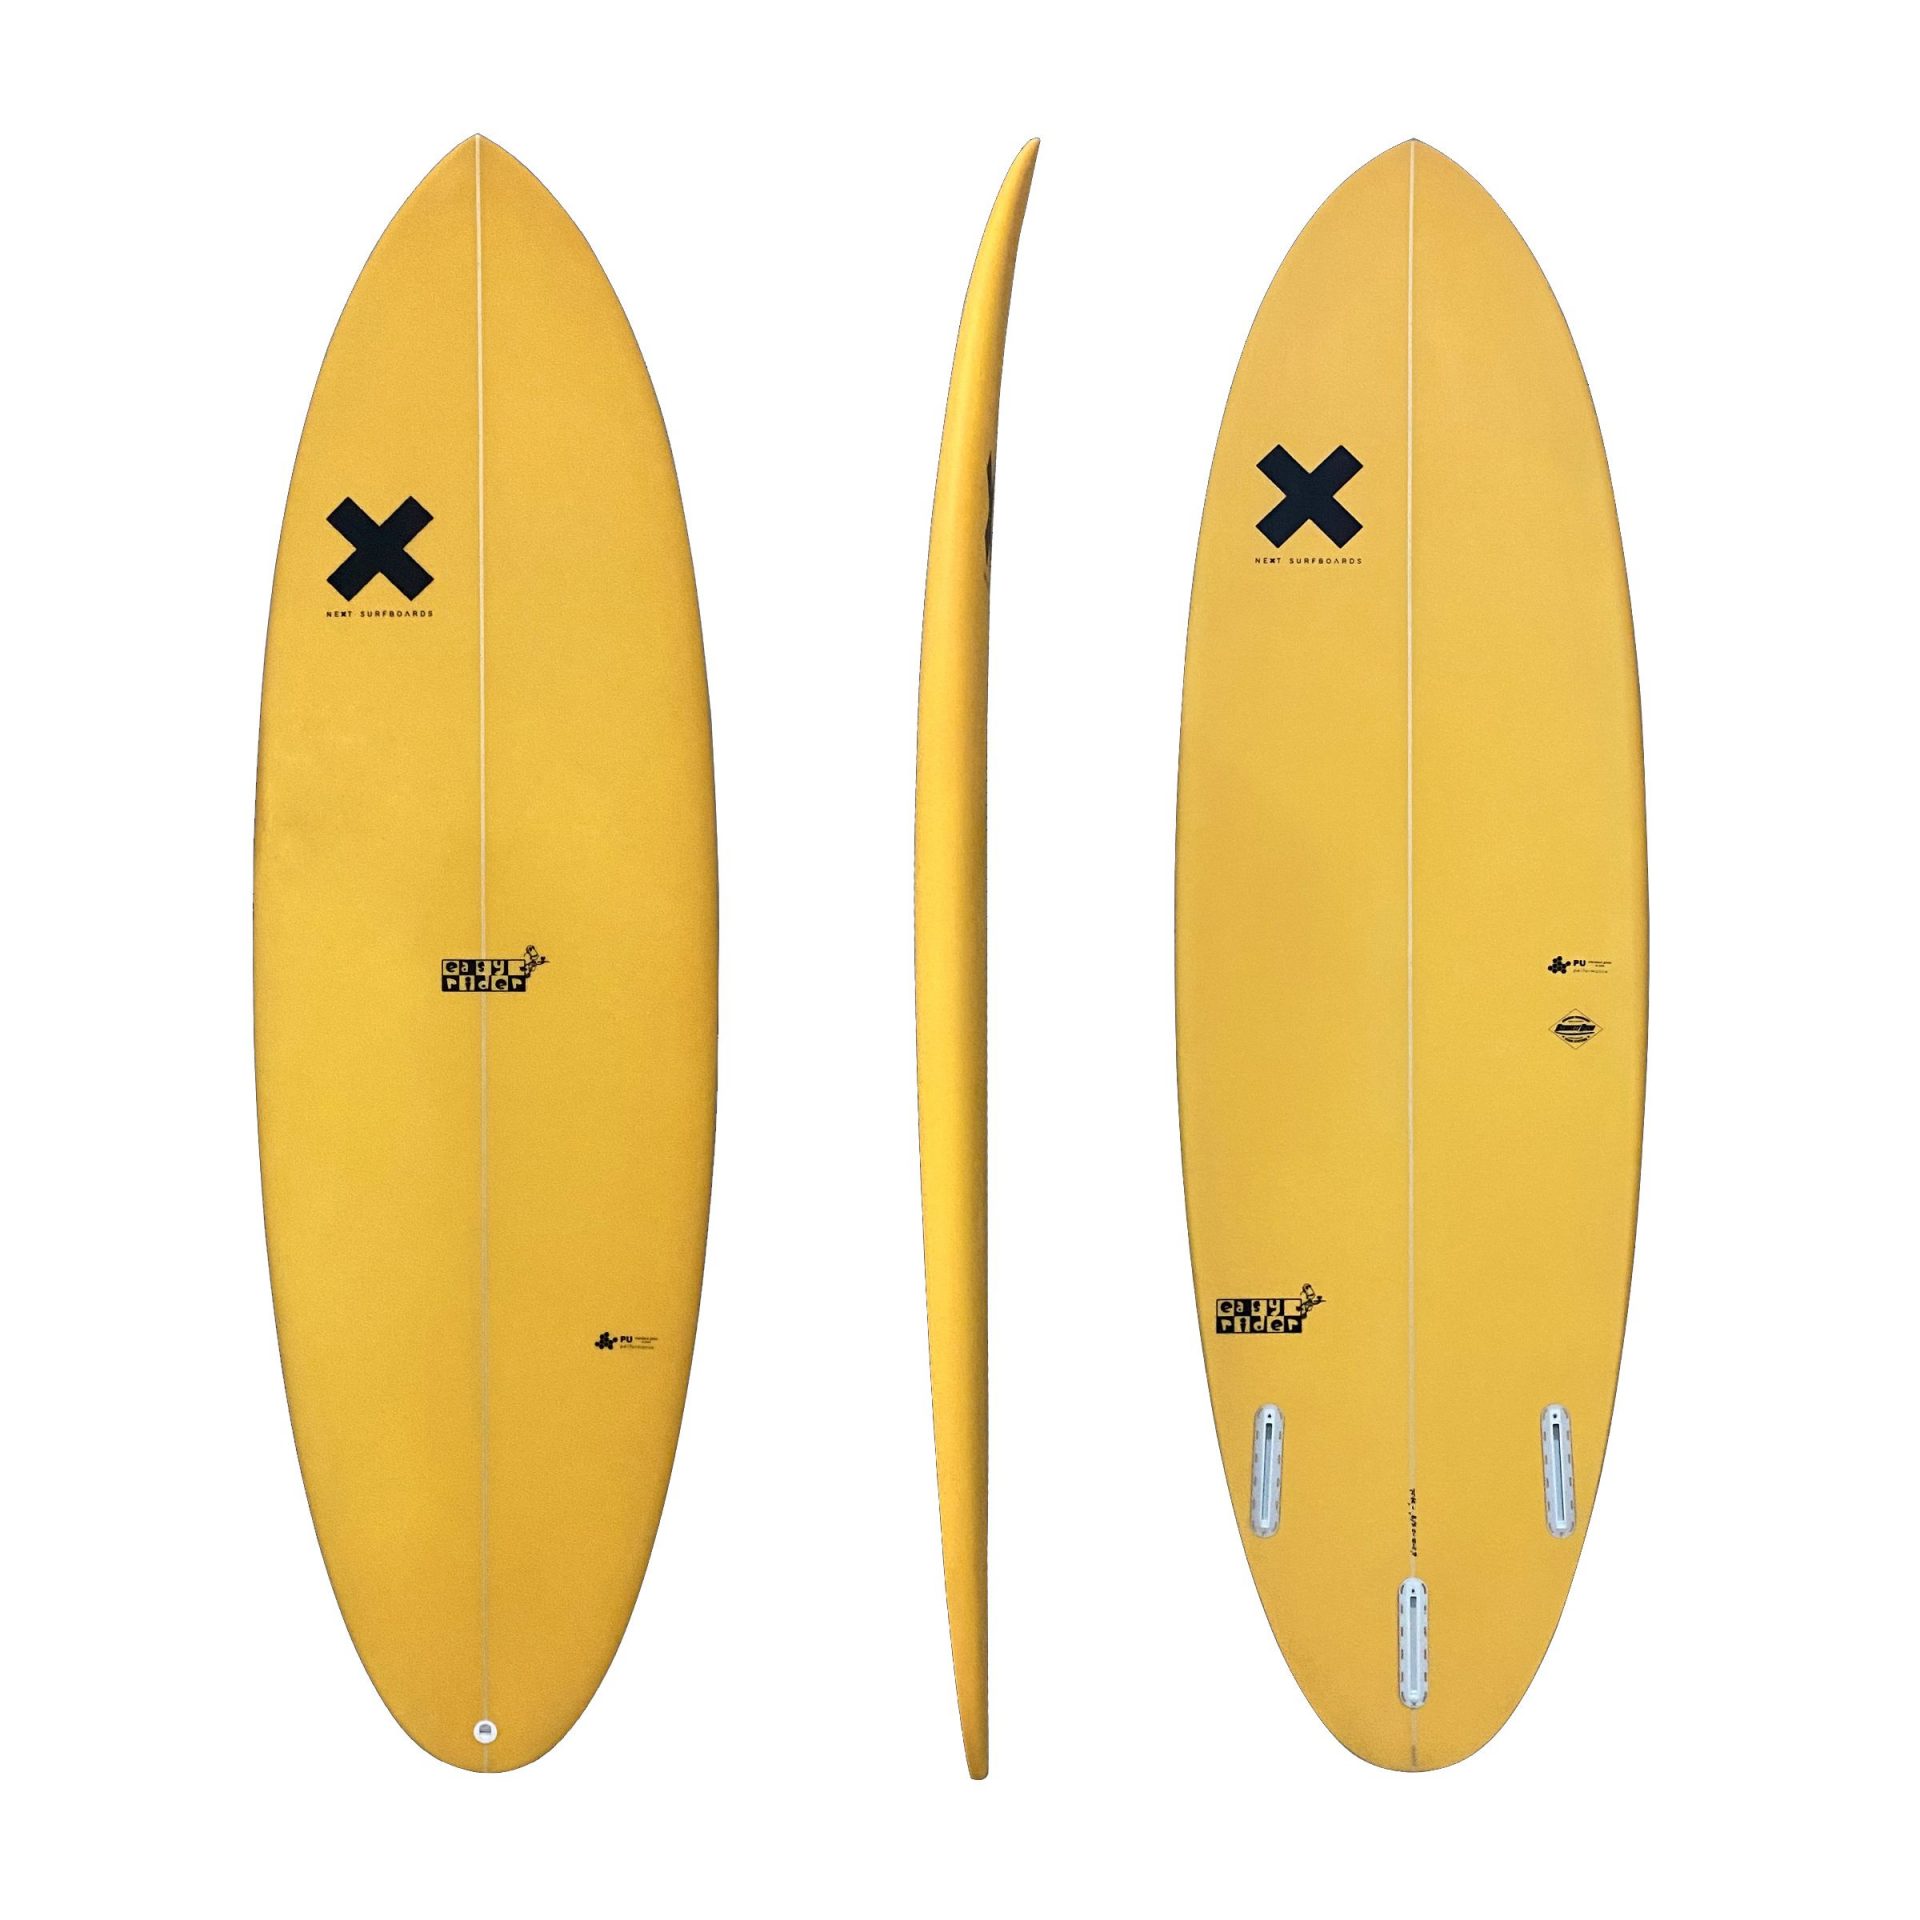 Next surfboards Easy Rider-A